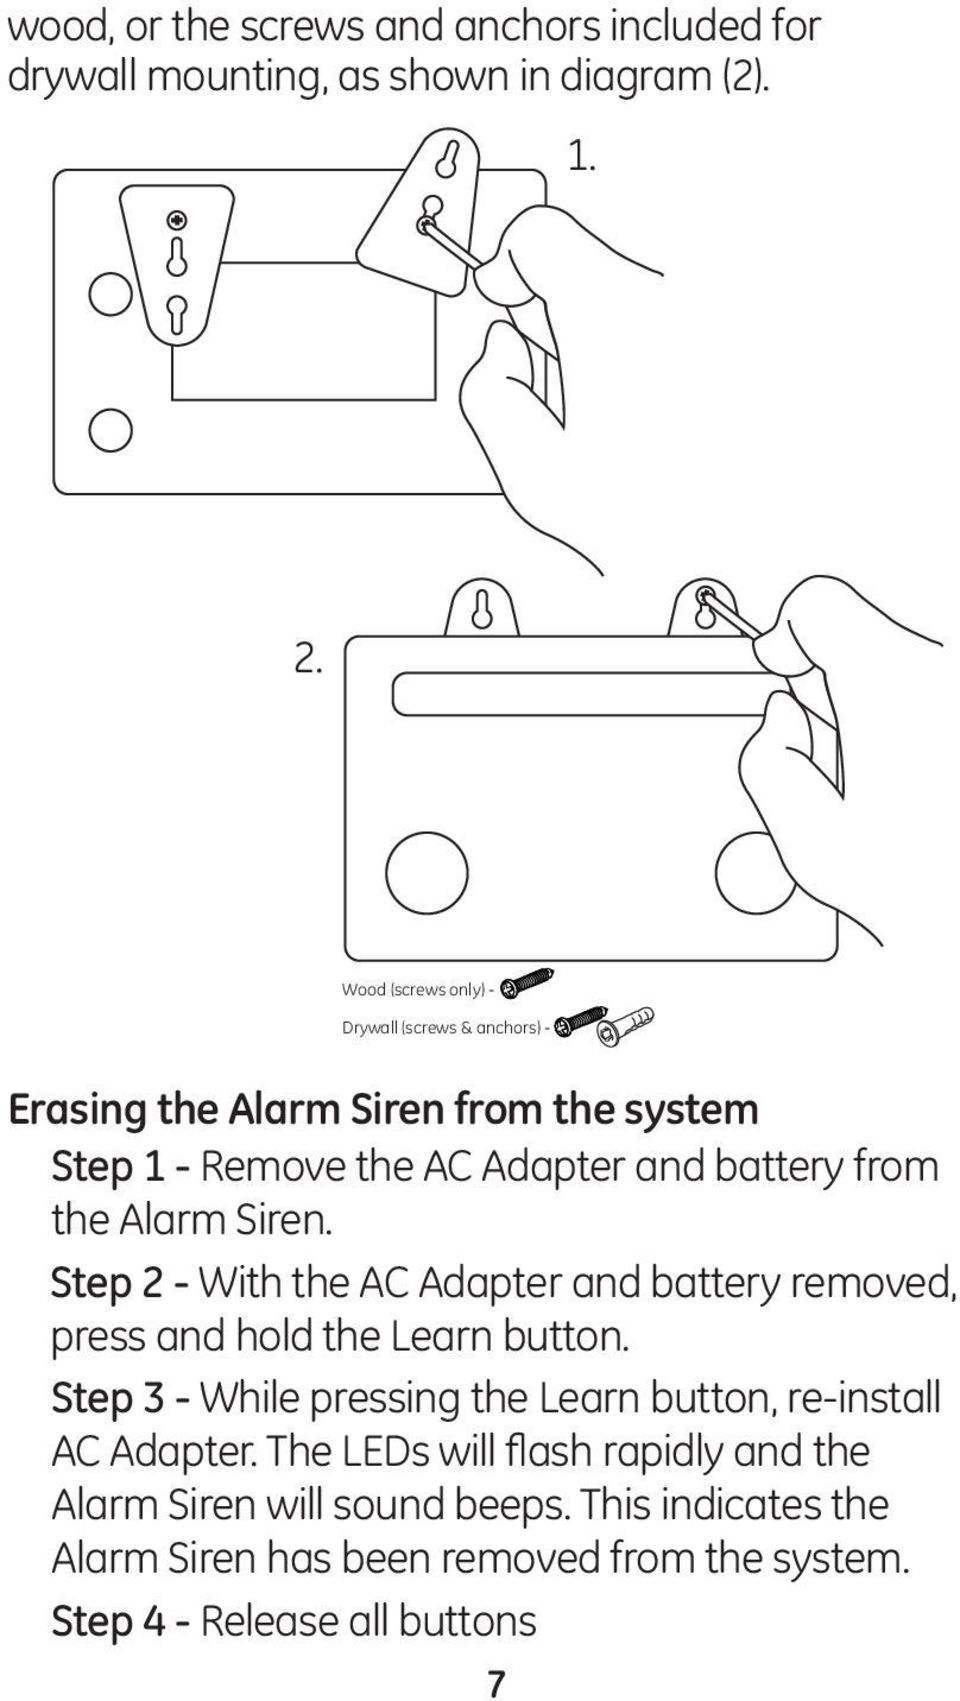 Siren. Step 2 - With the AC Adapter and battery removed, press and hold the Learn button.